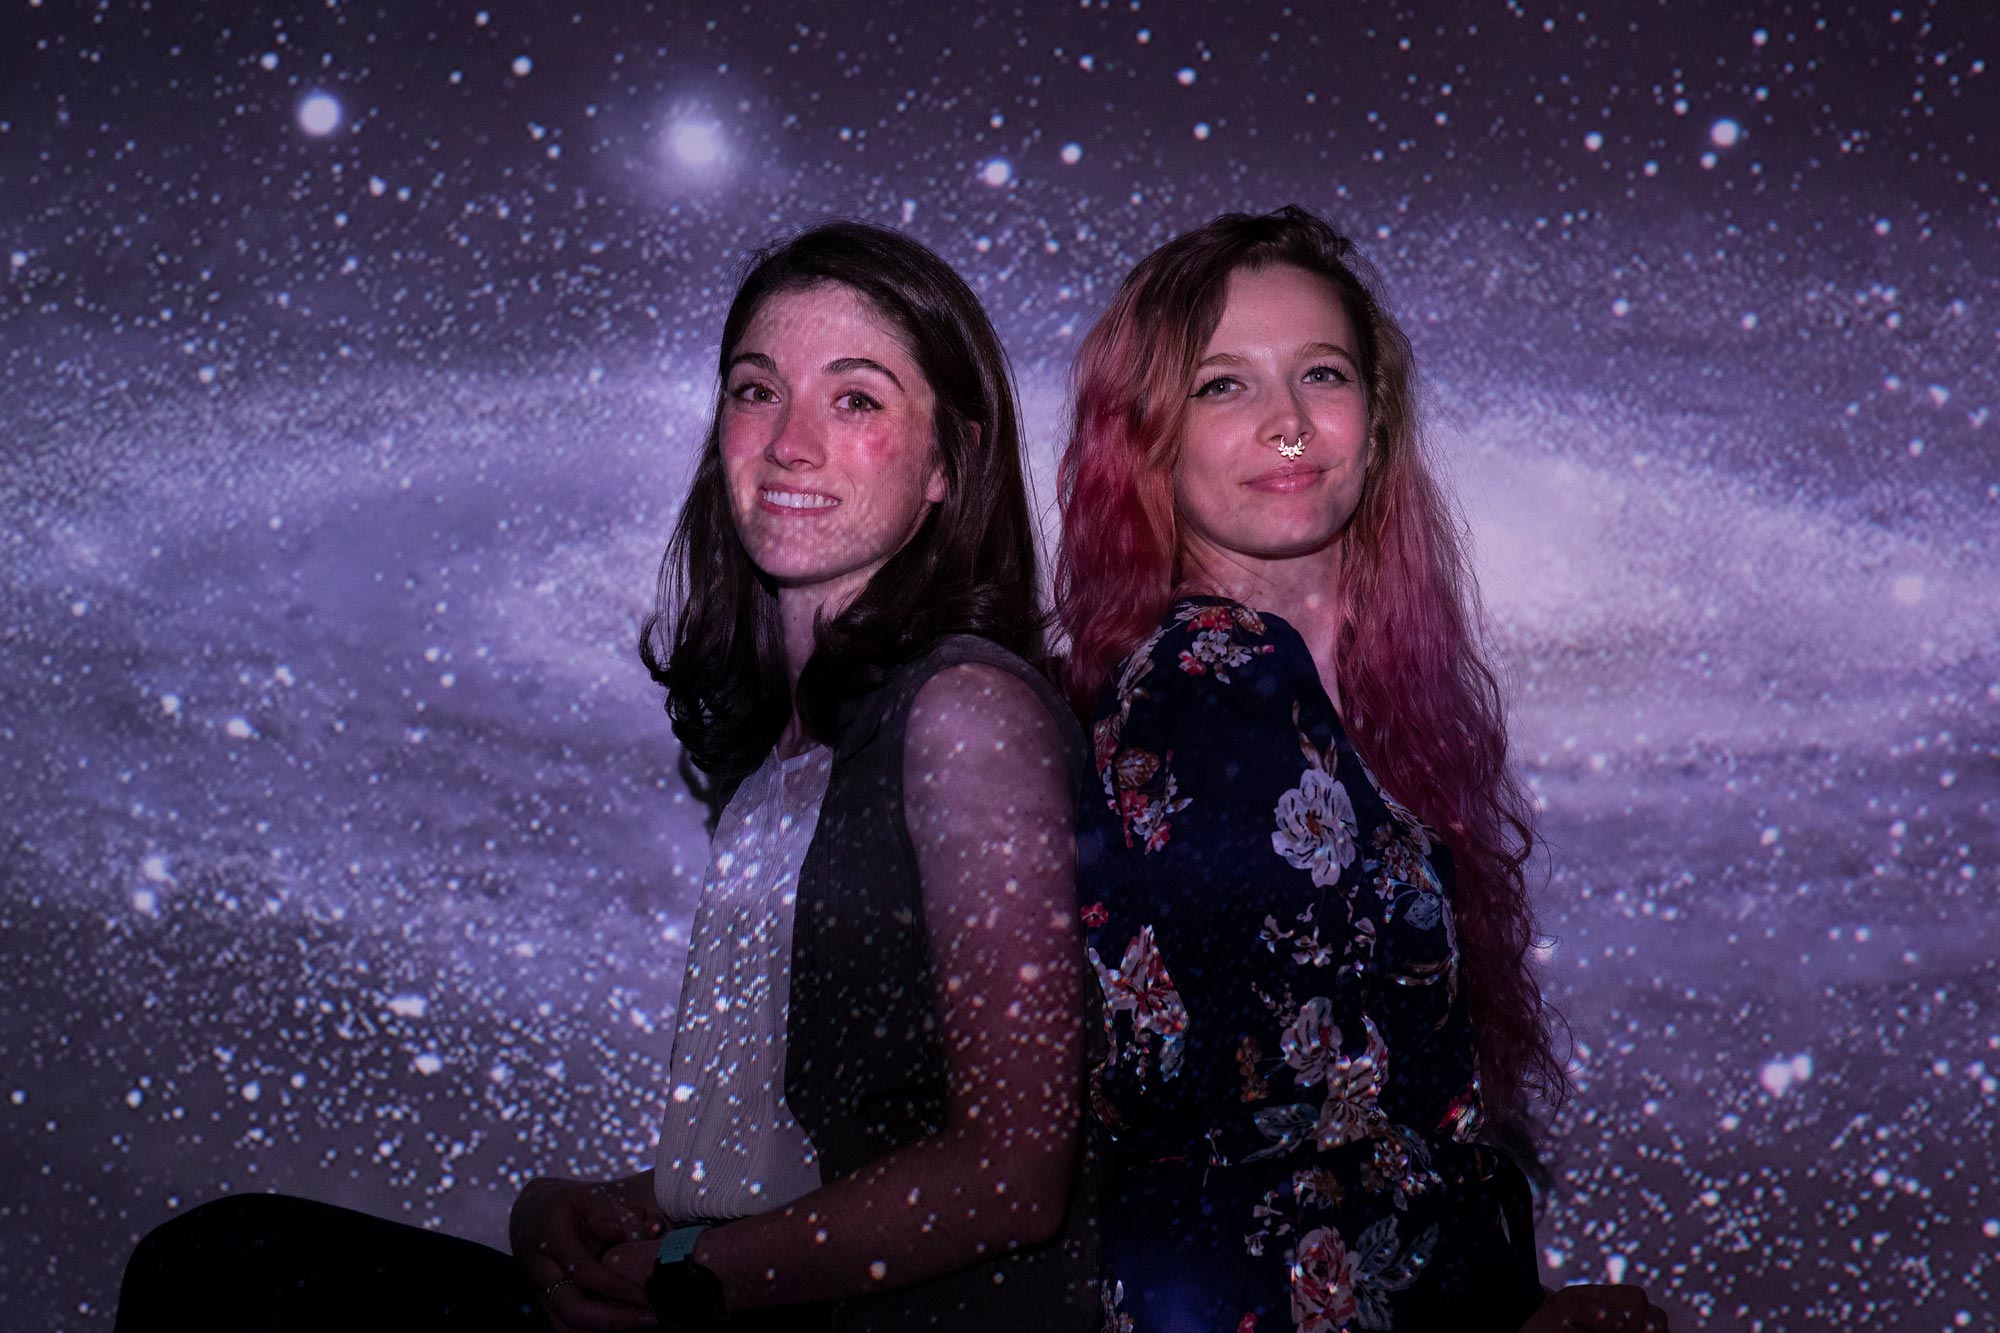 Mary Brewer (right) and Hannah Lewis, left stand back to bak while they are blended into the milkyway background